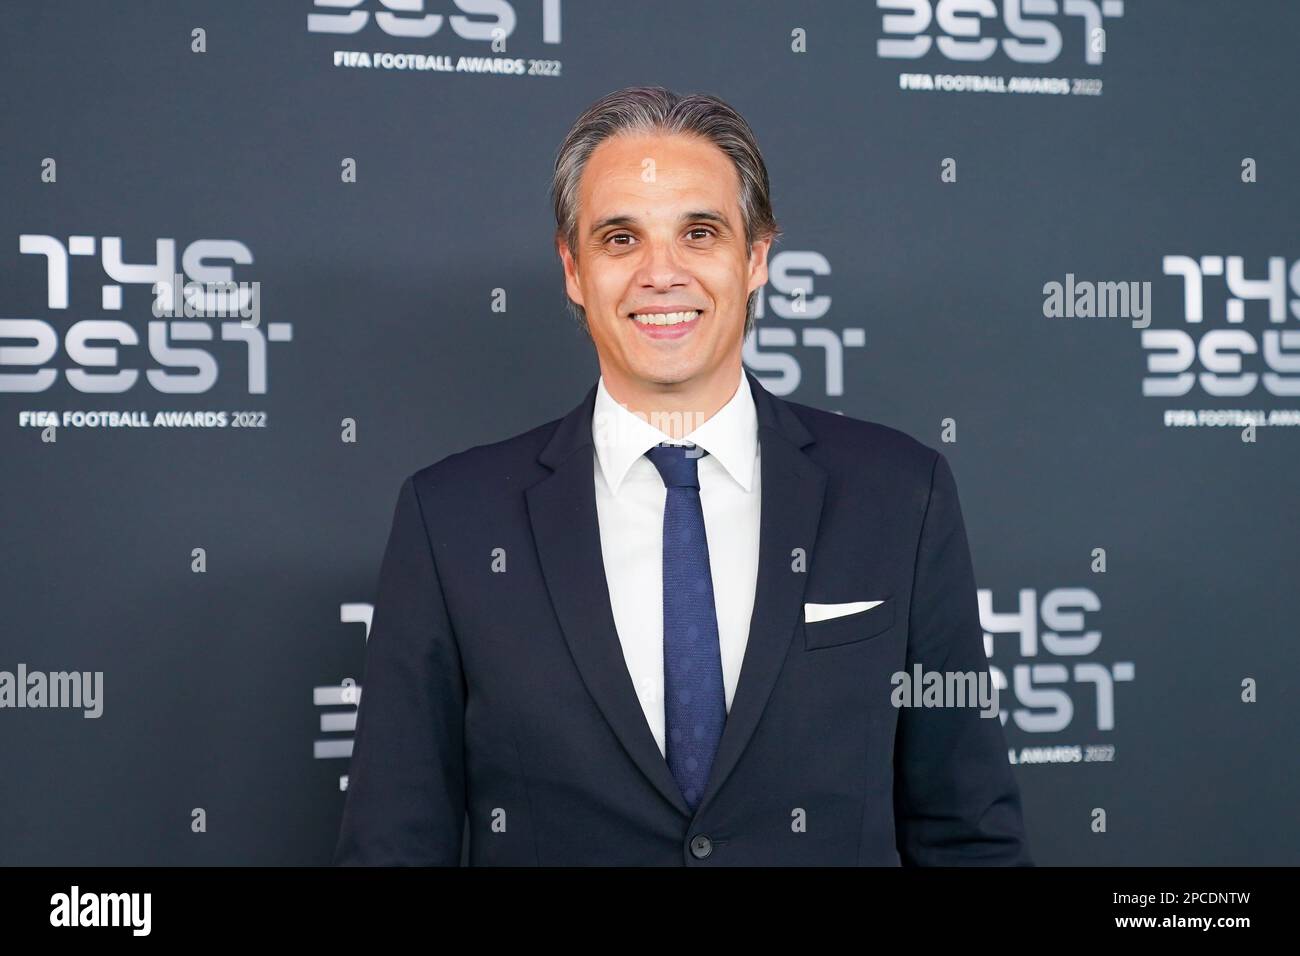 Paris, France. 27th Feb, 2023. Nuno Gomes during the The Best FIFA Football Awards 2022 at Salle Pleyel in Paris, France. (Foto: Daniela Porcelli/Sports Press Photo/C - ONE HOUR DEADLINE - ONLY ACTIVATE FTP IF IMAGES LESS THAN ONE HOUR OLD - Alamy) Credit: SPP Sport Press Photo. /Alamy Live News Stock Photo